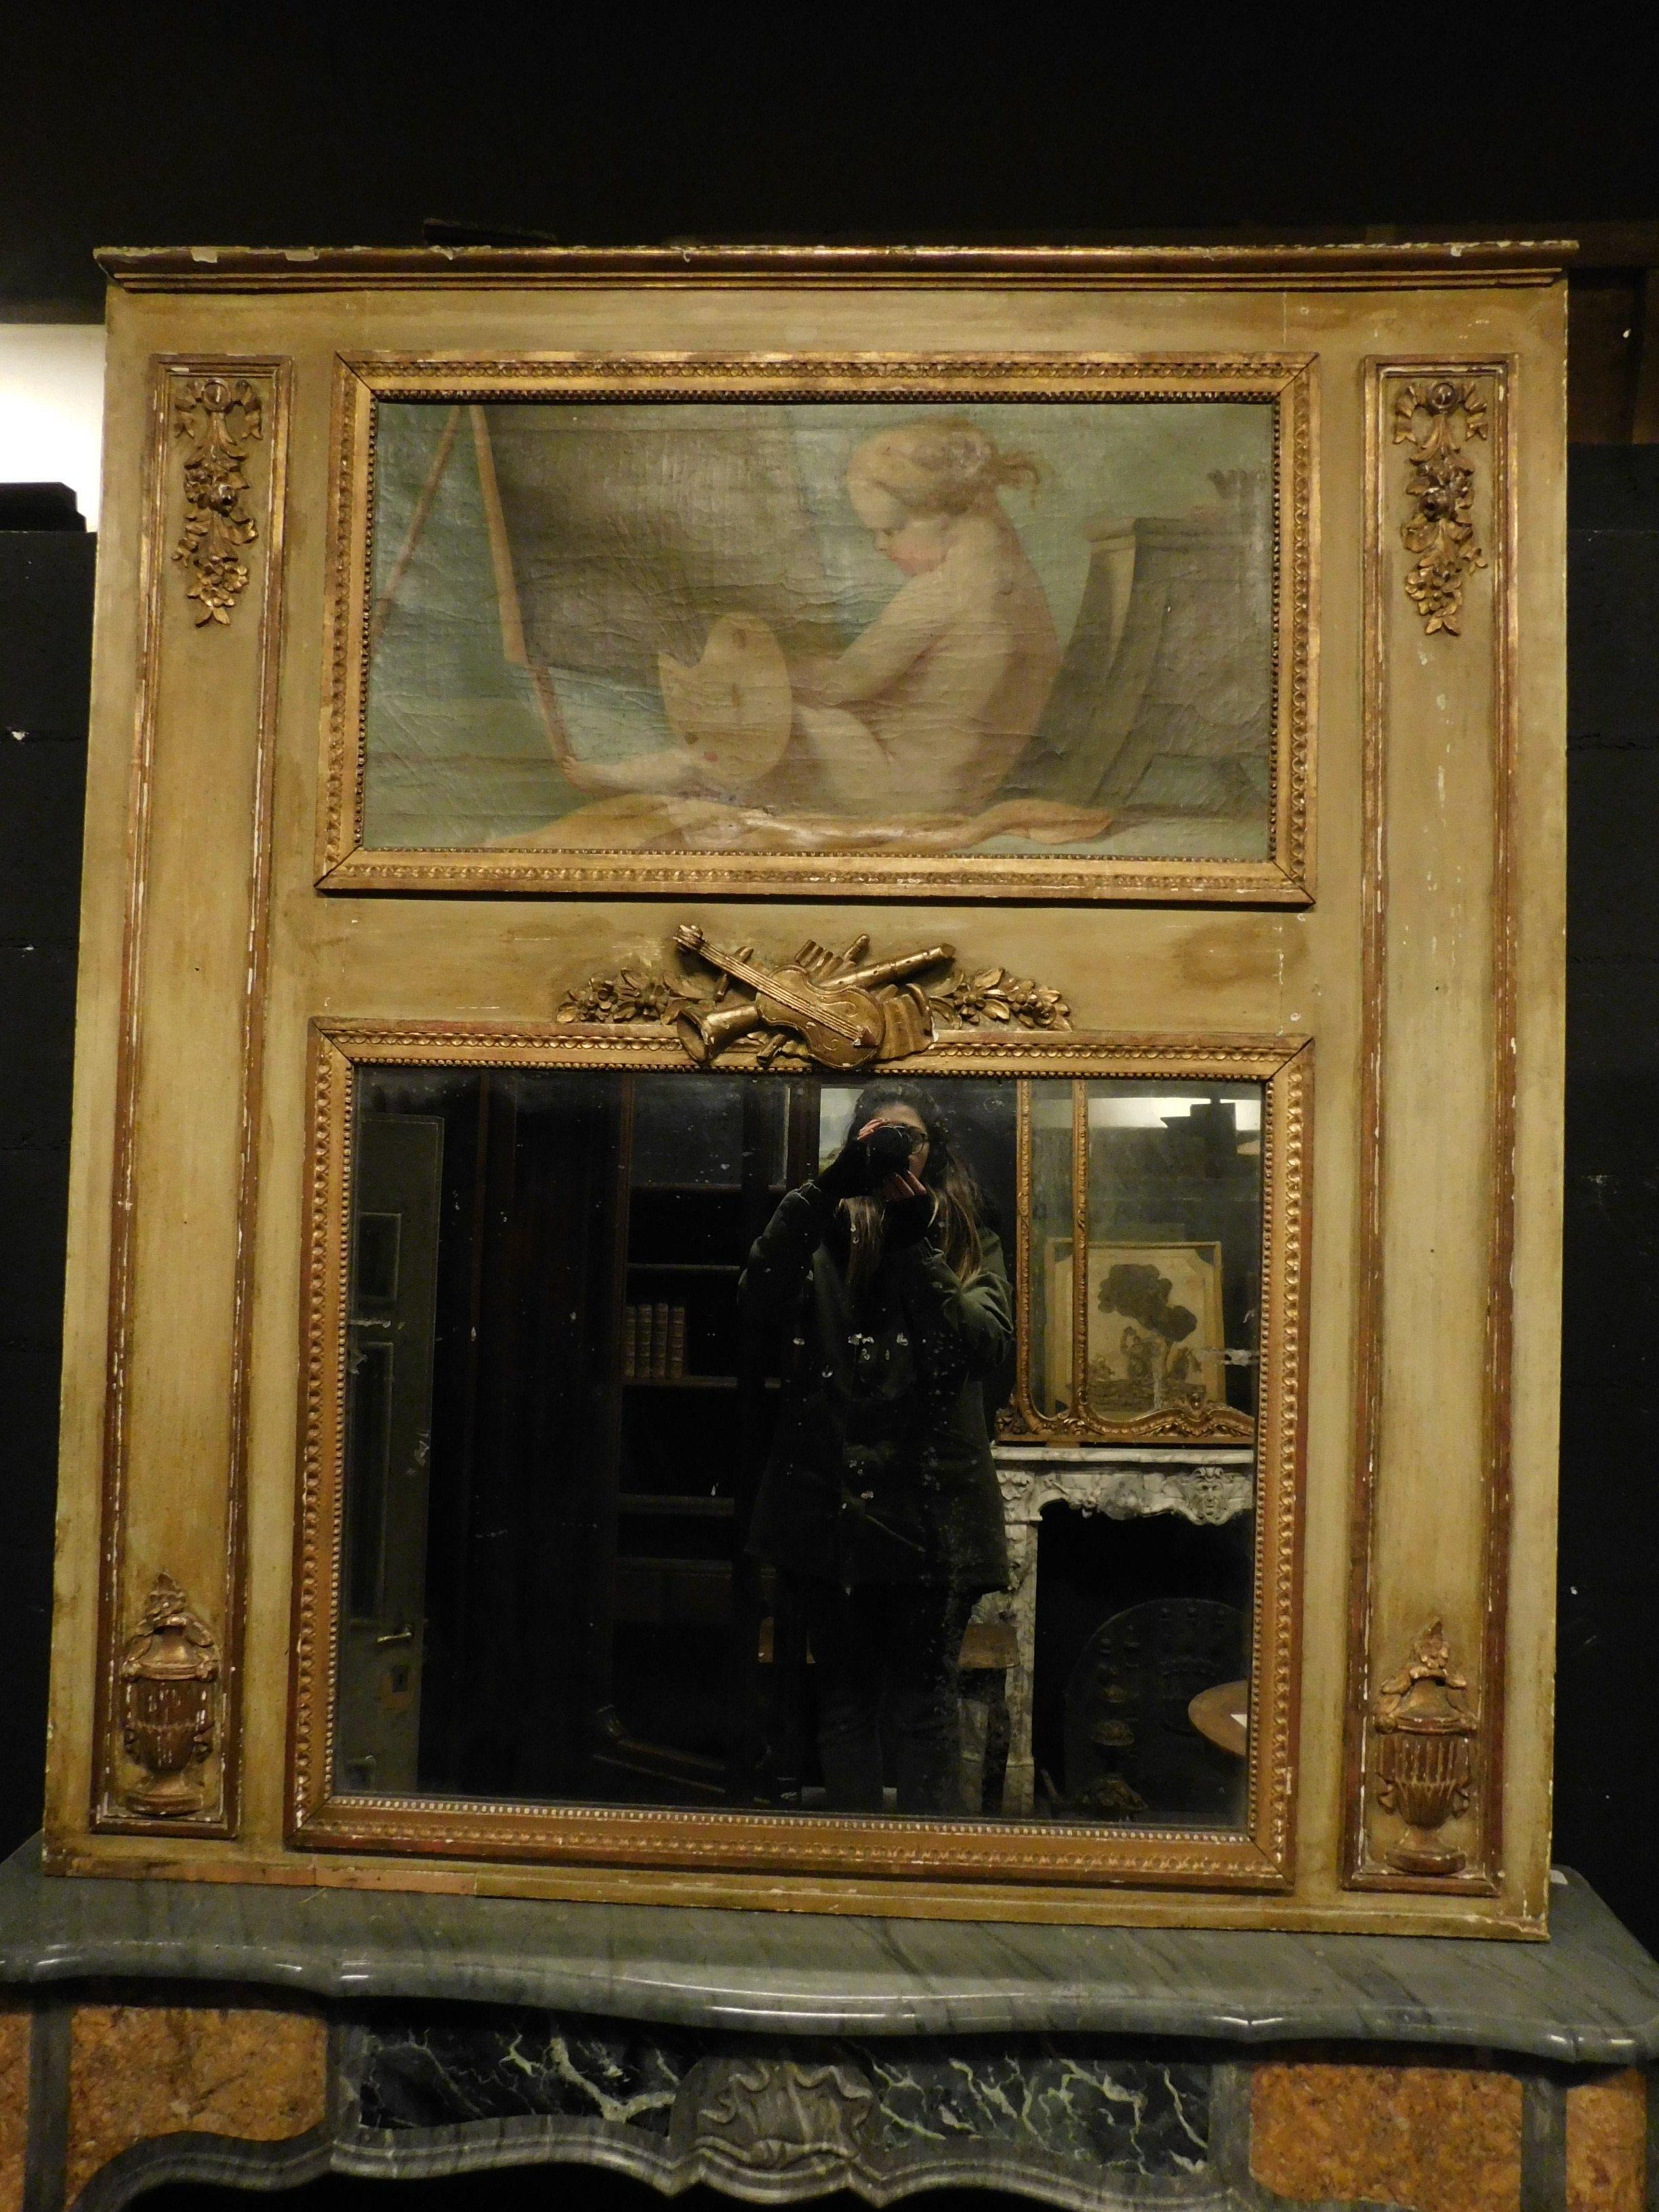 French Antique Gilded Louis XVI Mirror with Painting, Inspired by Art, France, 1700